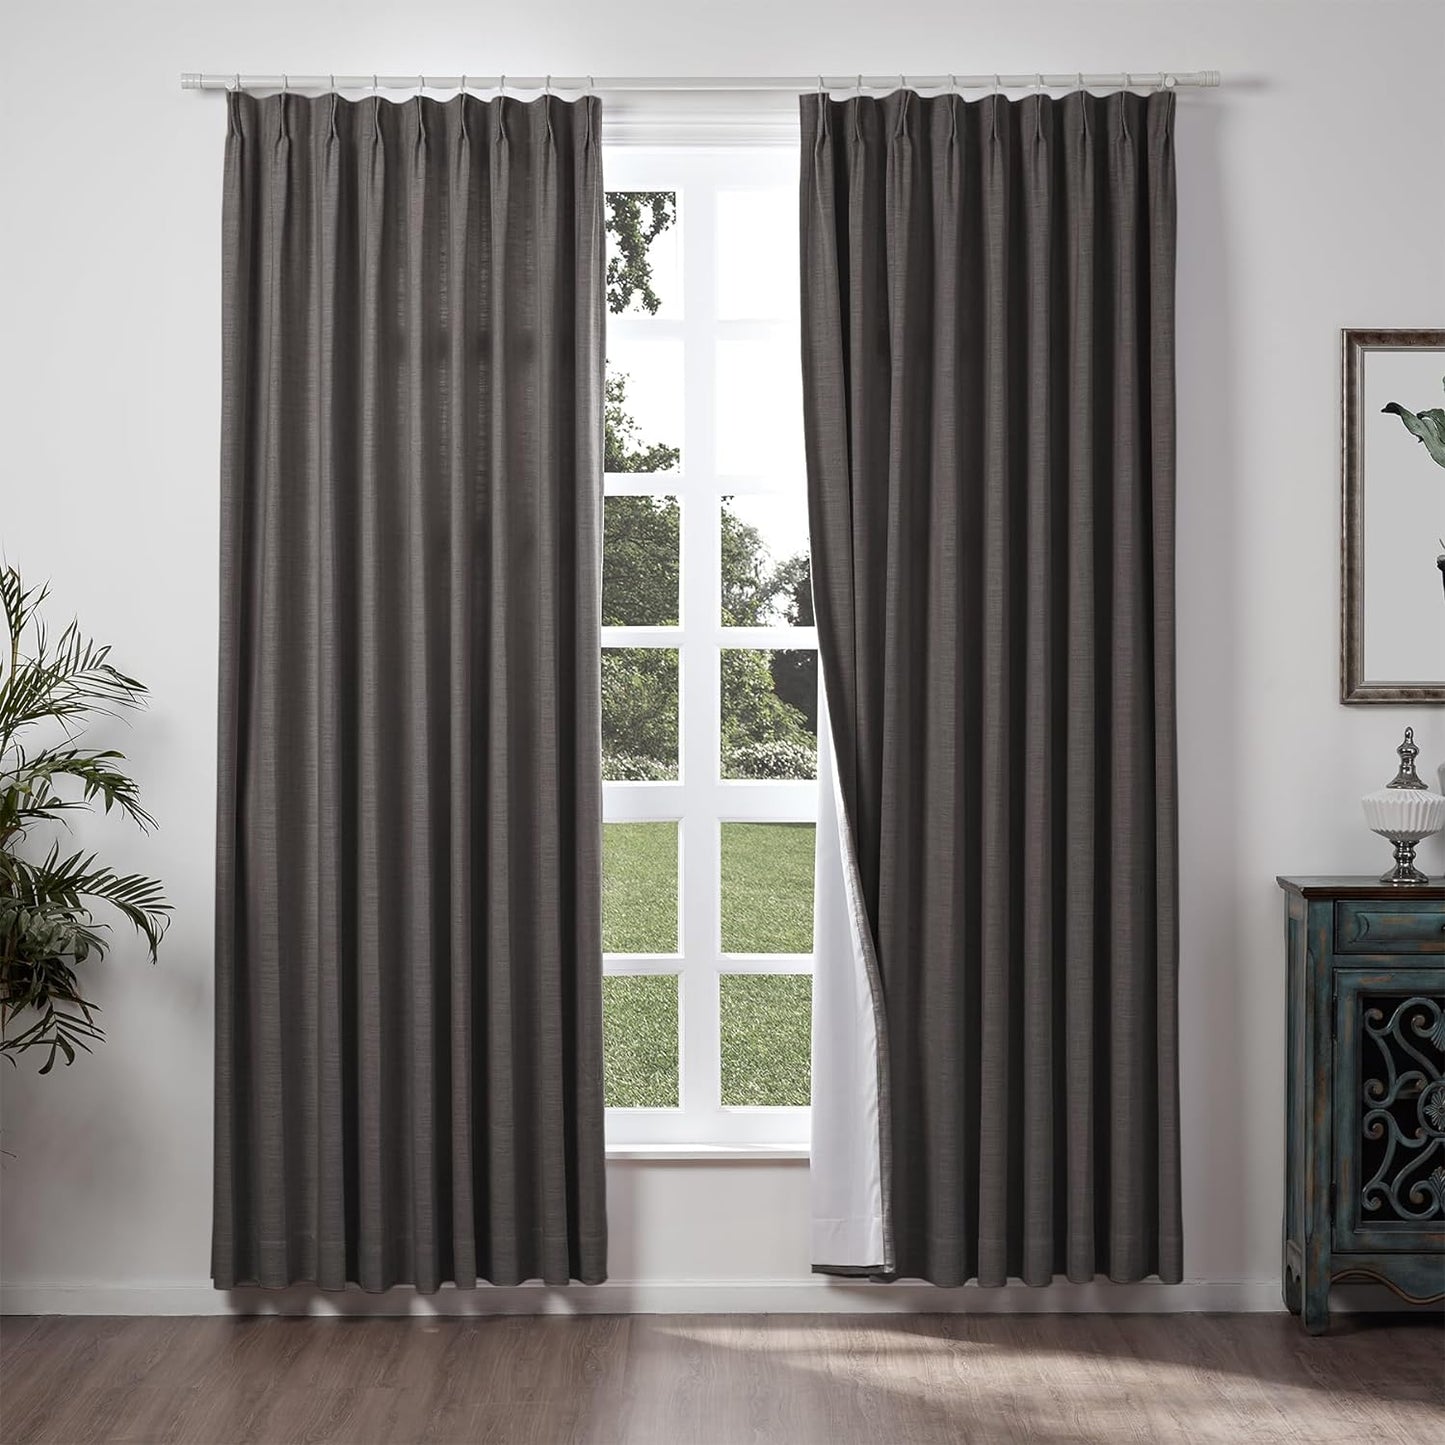 Chadmade 50" W X 63" L Polyester Linen Drape with Blackout Lining Pinch Pleat Curtain for Sliding Door Patio Door Living Room Bedroom, (1 Panel) Sand Beige Tallis Collection  ChadMade Chocolate Tart (13) 50Wx96L 